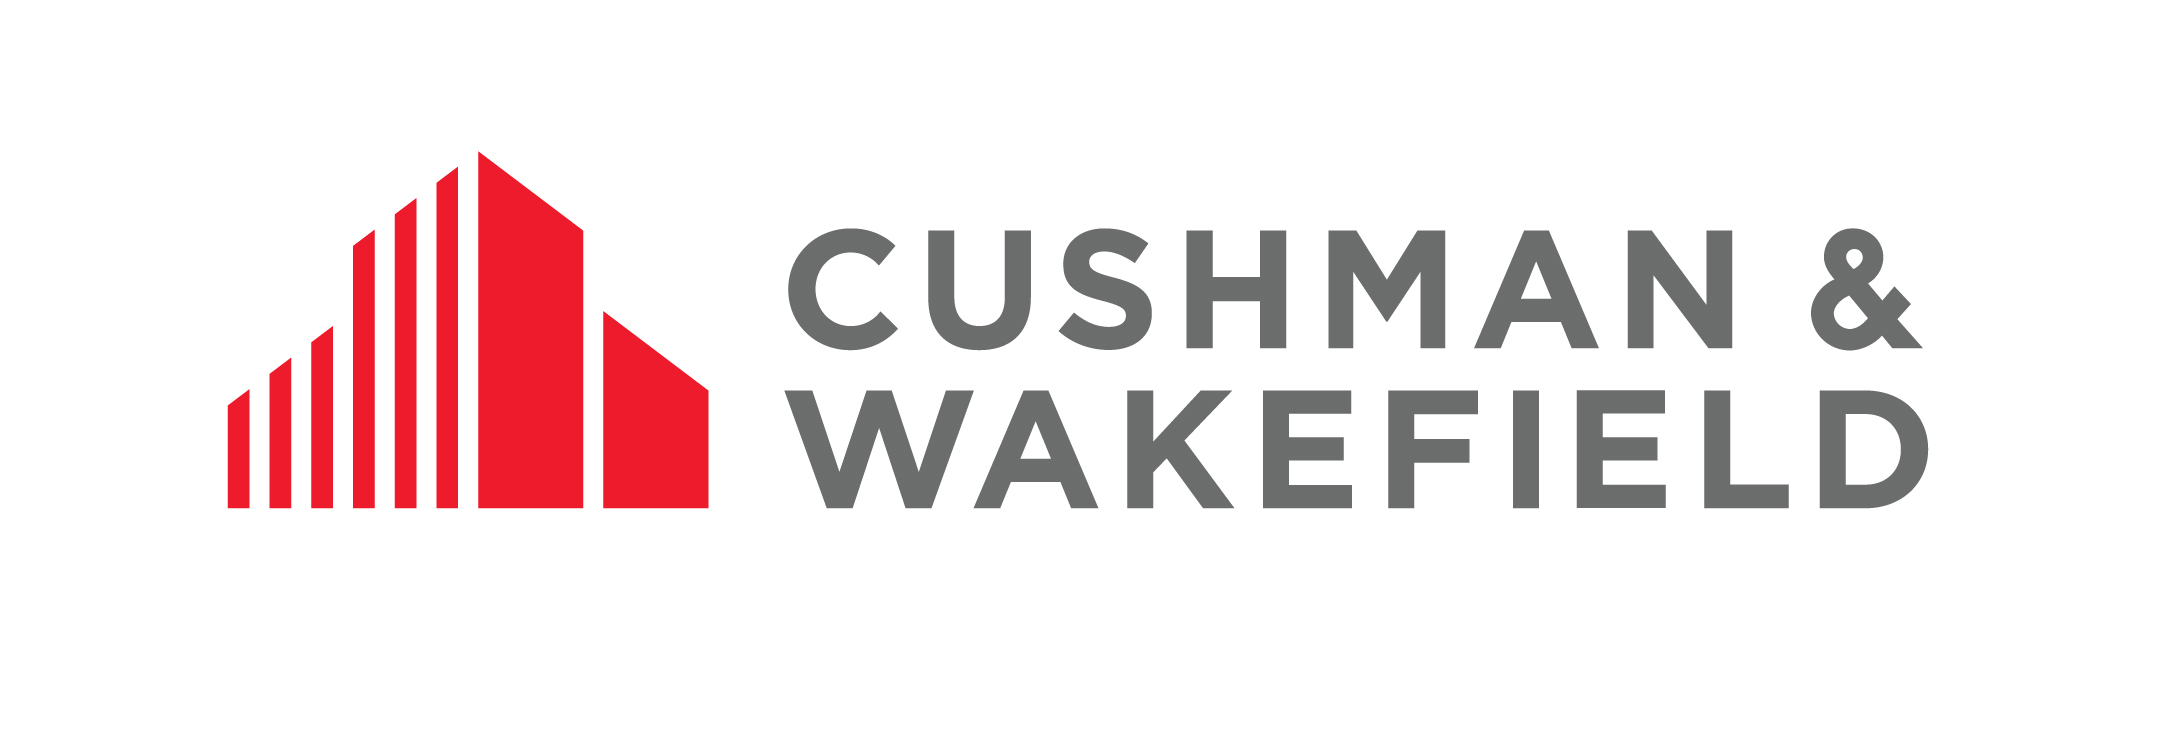 WeWork and Cushman & Wakefield Form Exclusive Strategic Partnership to Deliver Innovative Flexible Space Operating Platform | Business Wire